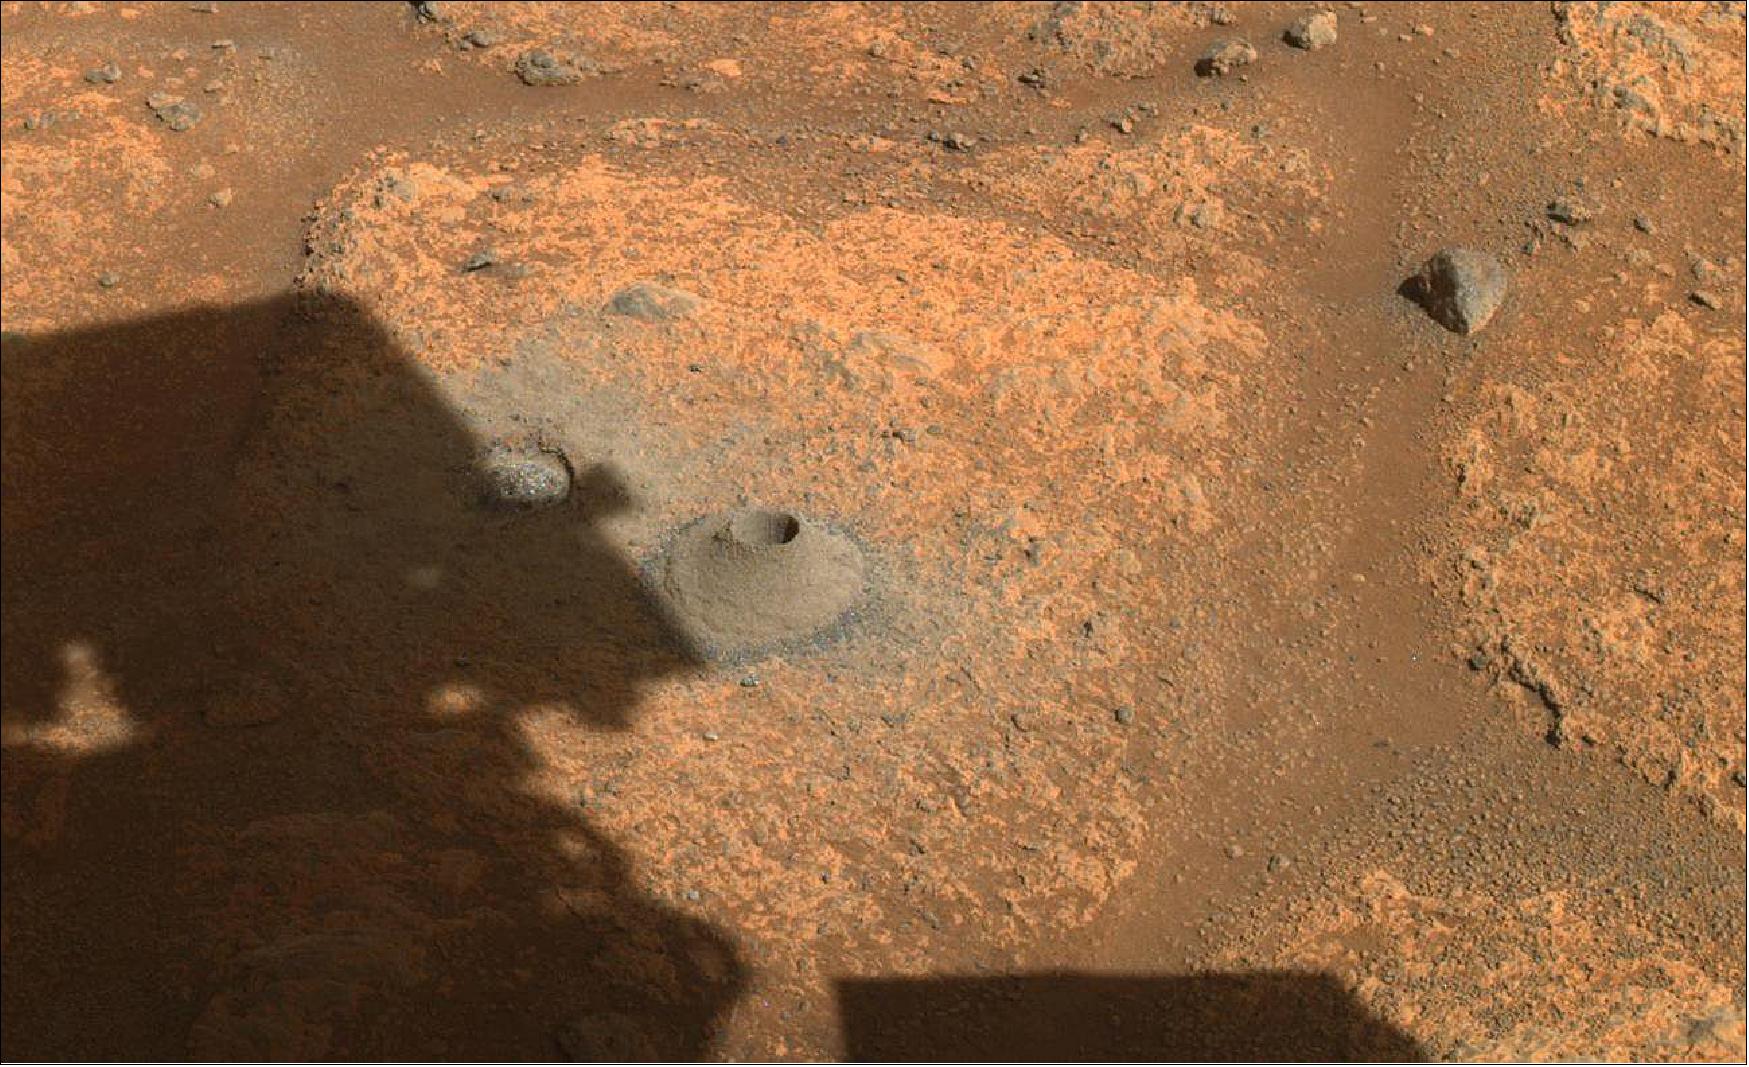 Figure 15: This image taken by NASA's Perseverance rover on August 6, 2021, shows the hole drilled in a Martian rock in preparation for the rover's first attempt to collect a sample. It was taken by one of the rover's hazard cameras in what the rover's science team has nicknamed a "paver rock" in the "Crater Floor Fractured Rough" area of Jezero Crater (image credit: NASA/JPL-Caltech)